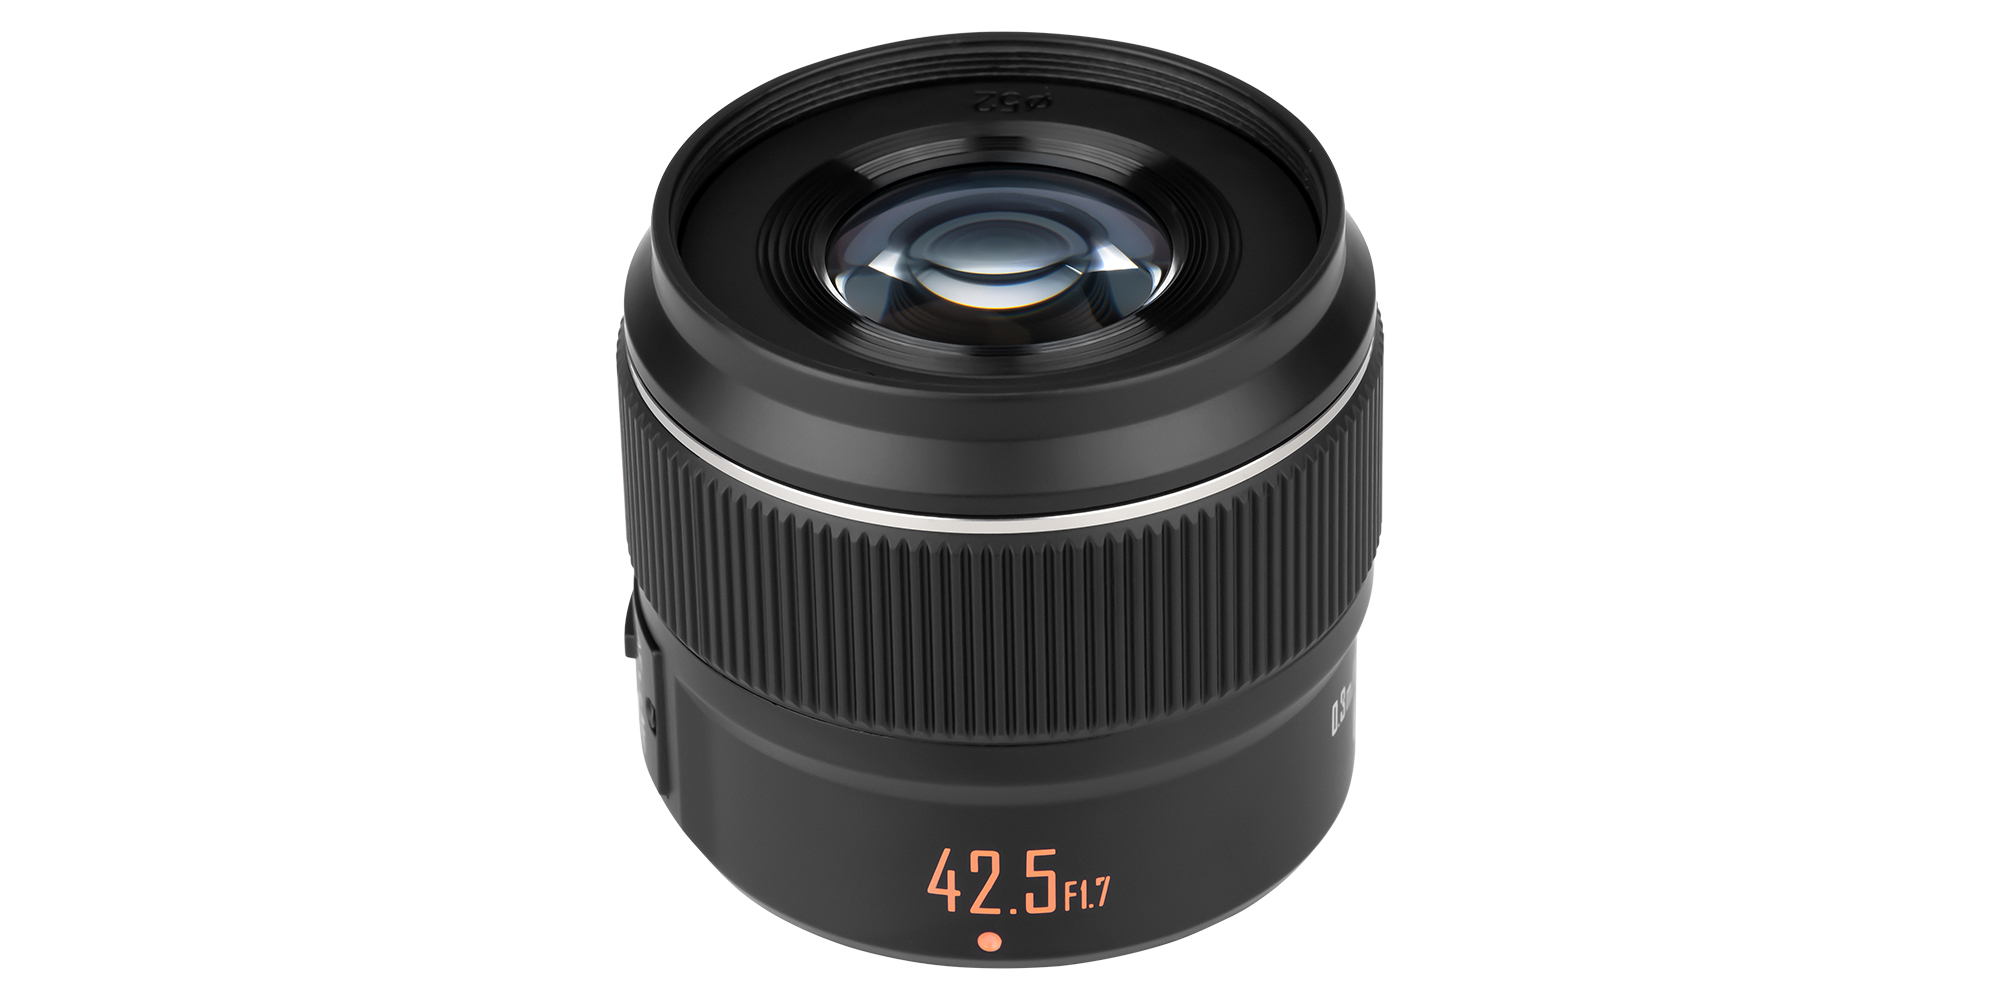 Yongnuo YN 35mm f/1.4 DF UWM lens for Canon EF - Lightweight and compact lens